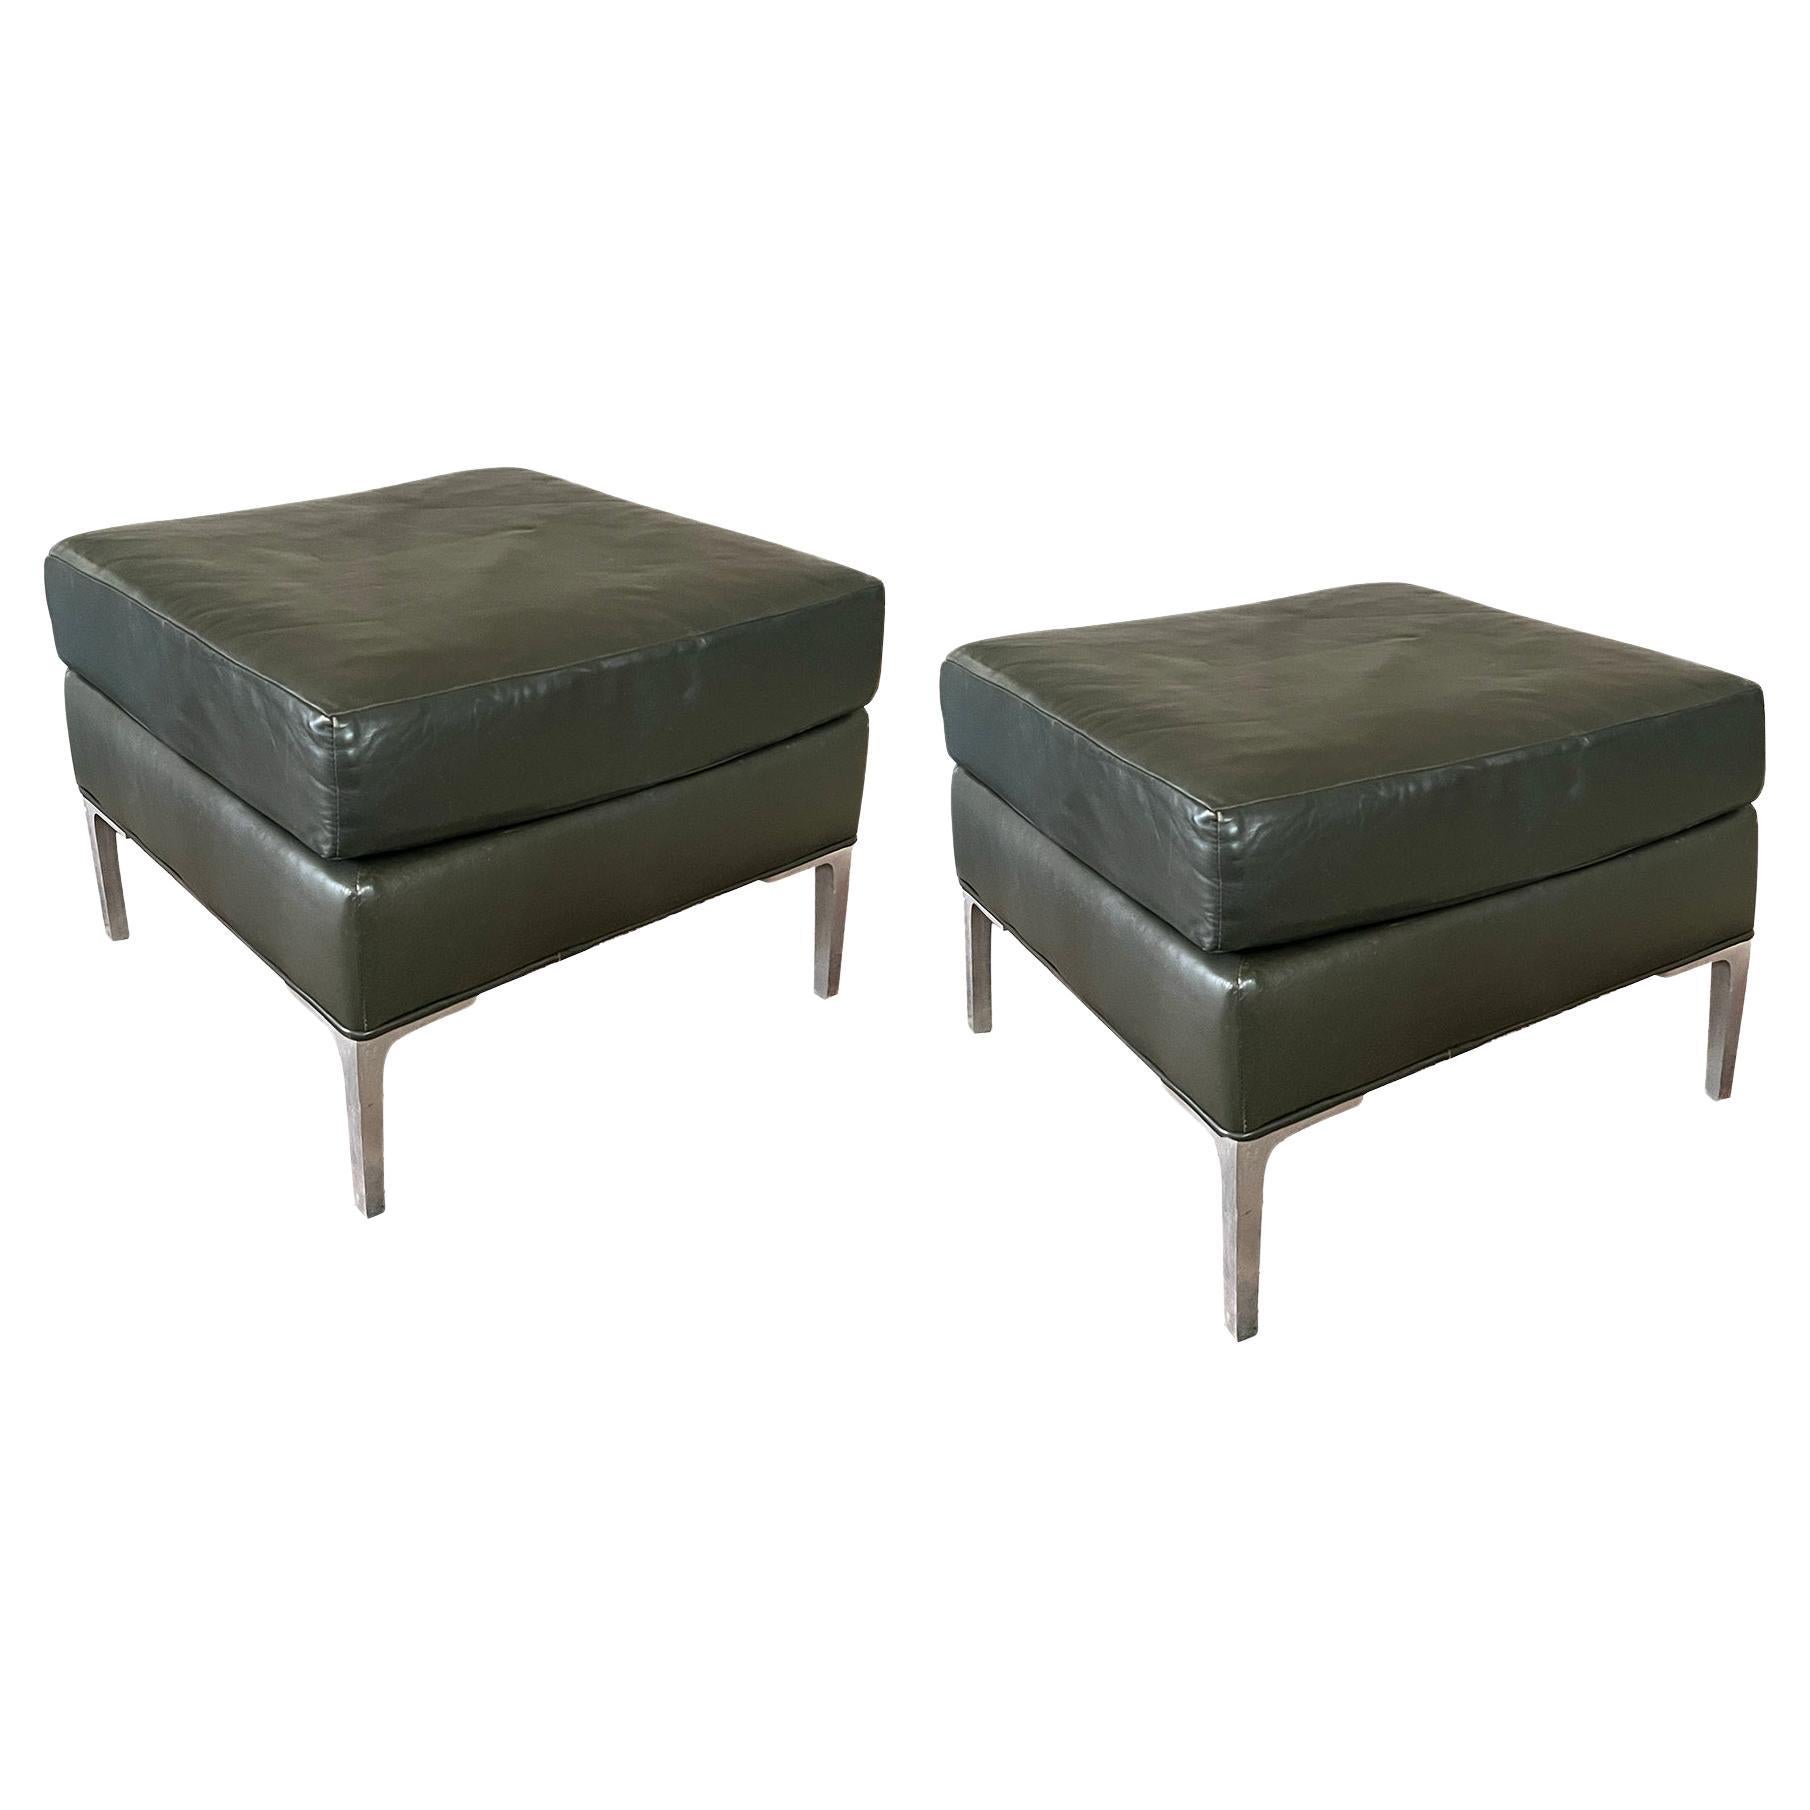 Pair of Hunter Green Square Faux Leather Stools/Benches with Brushed Steel Legs For Sale